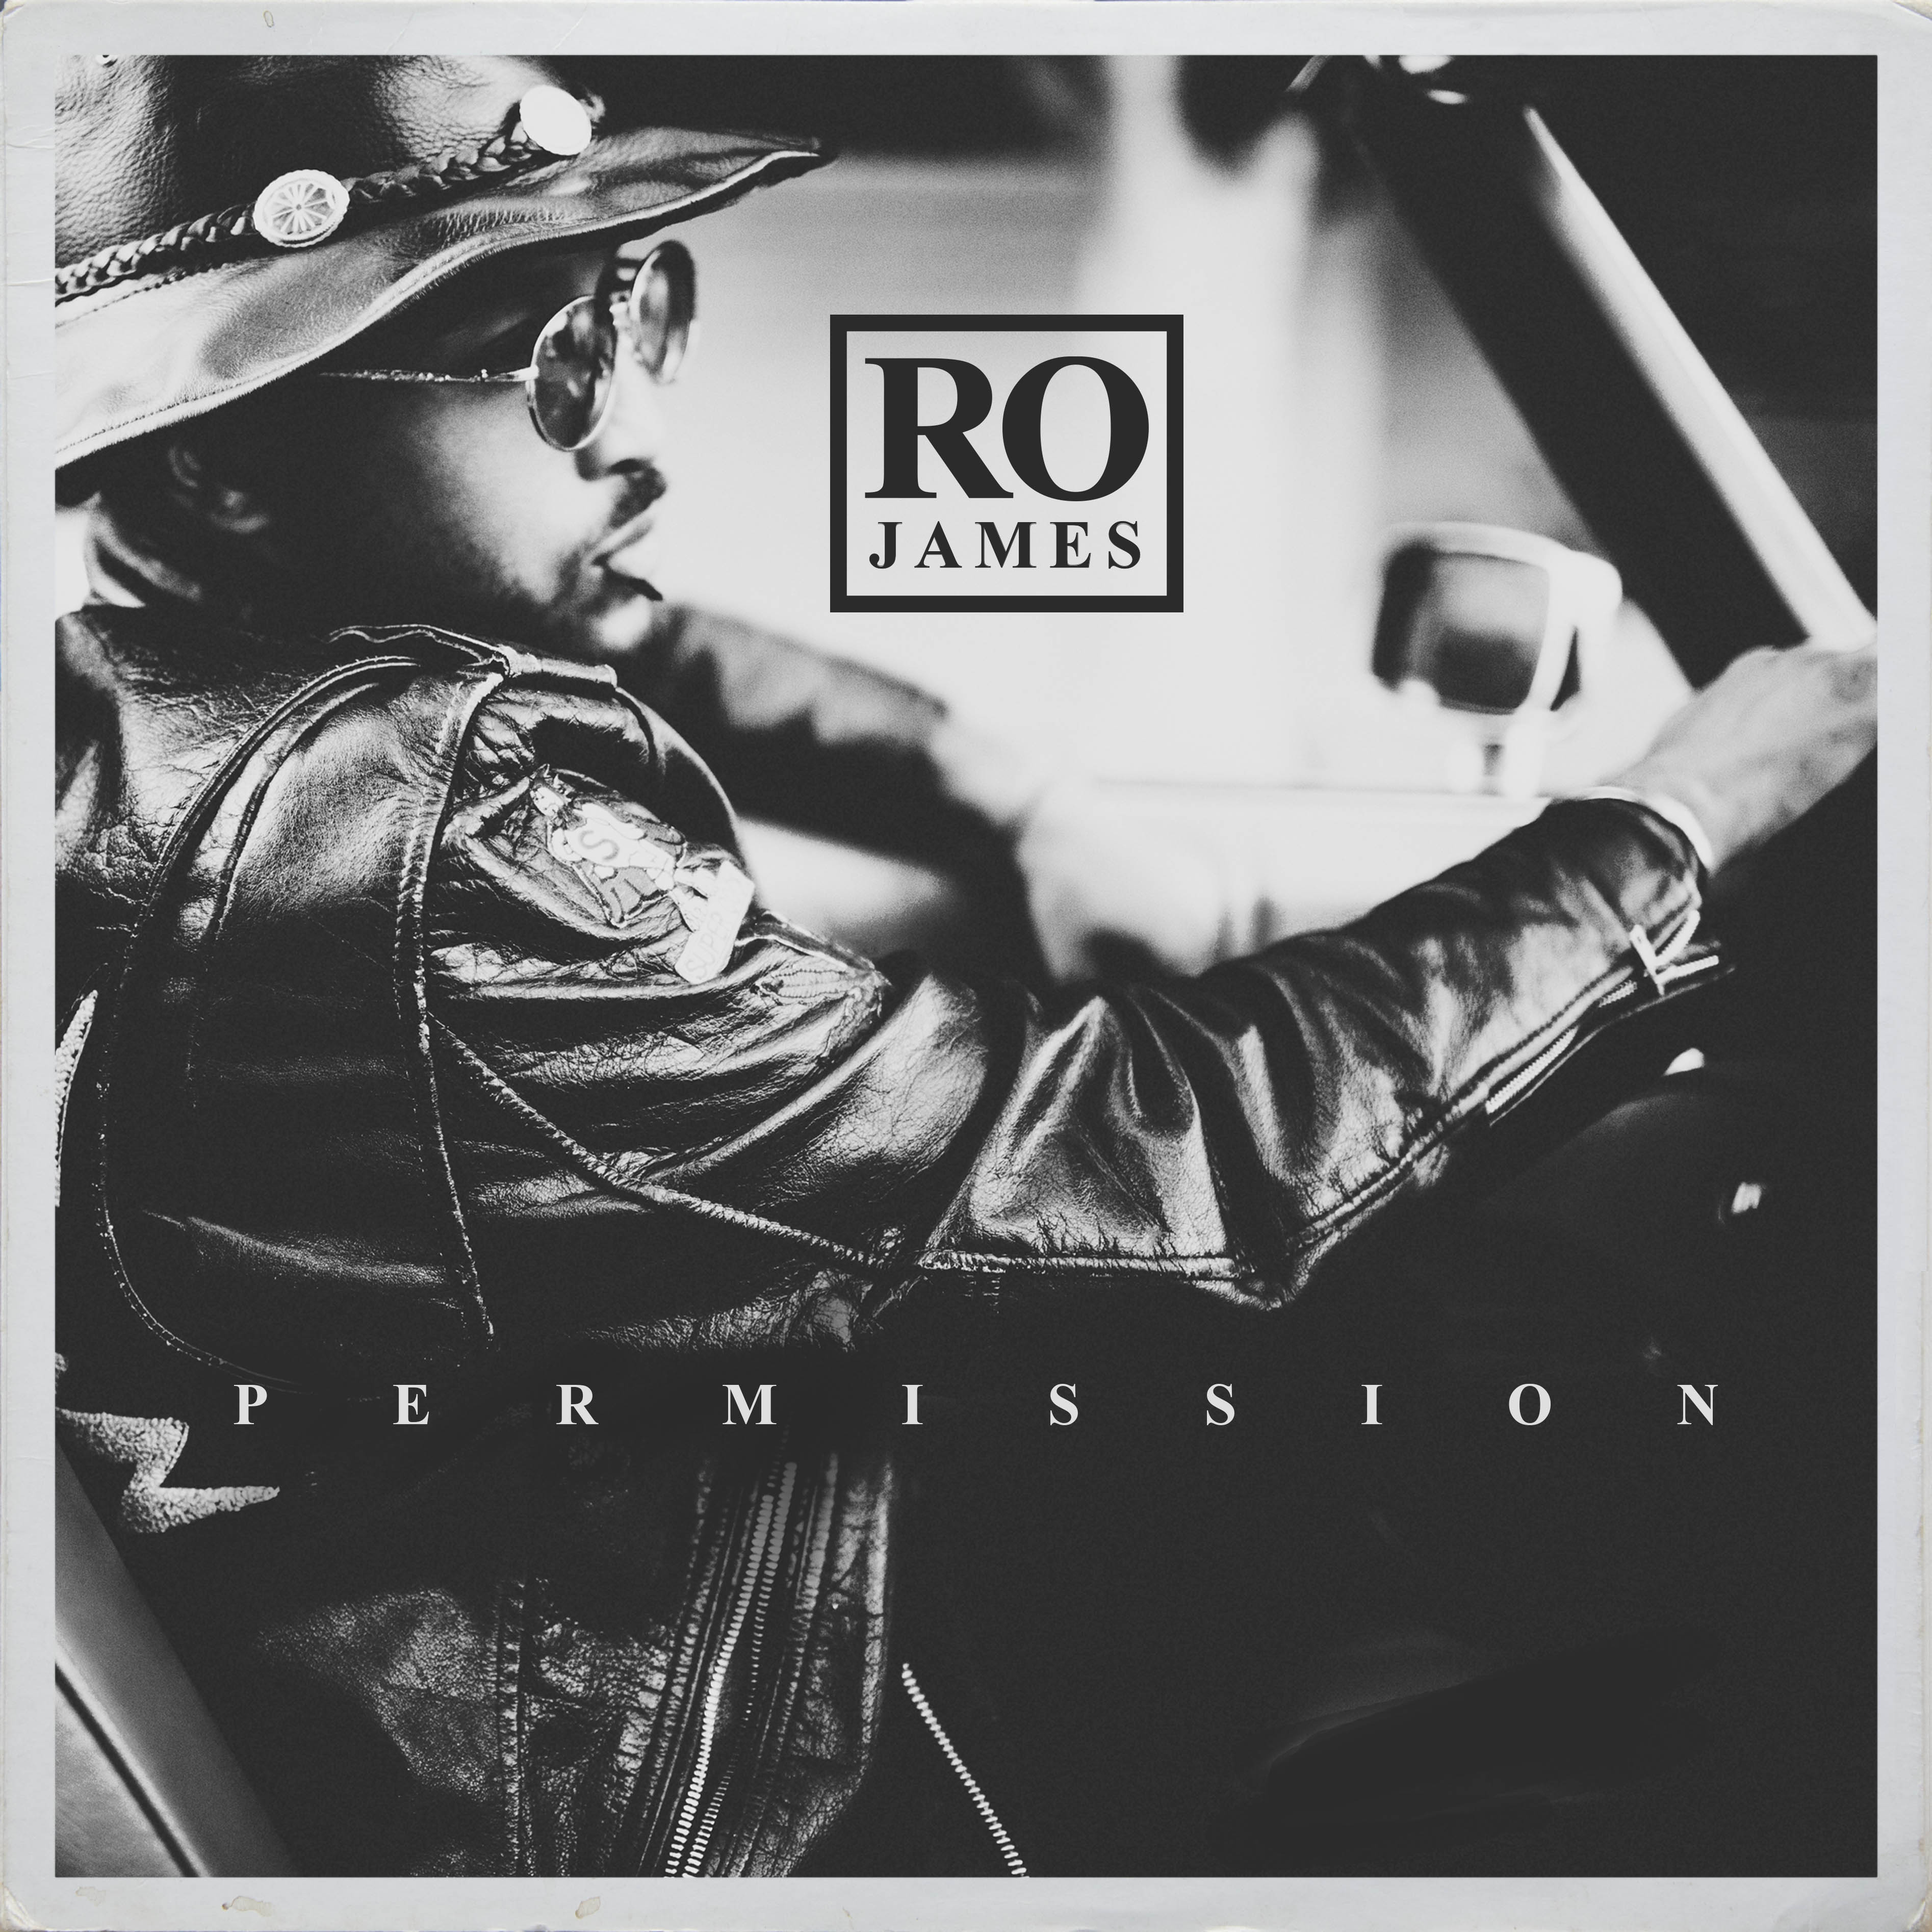 Ro James' "Permission" Tops The Urban Adult Contemporary Radio Chart At 1 This Week RCA Records